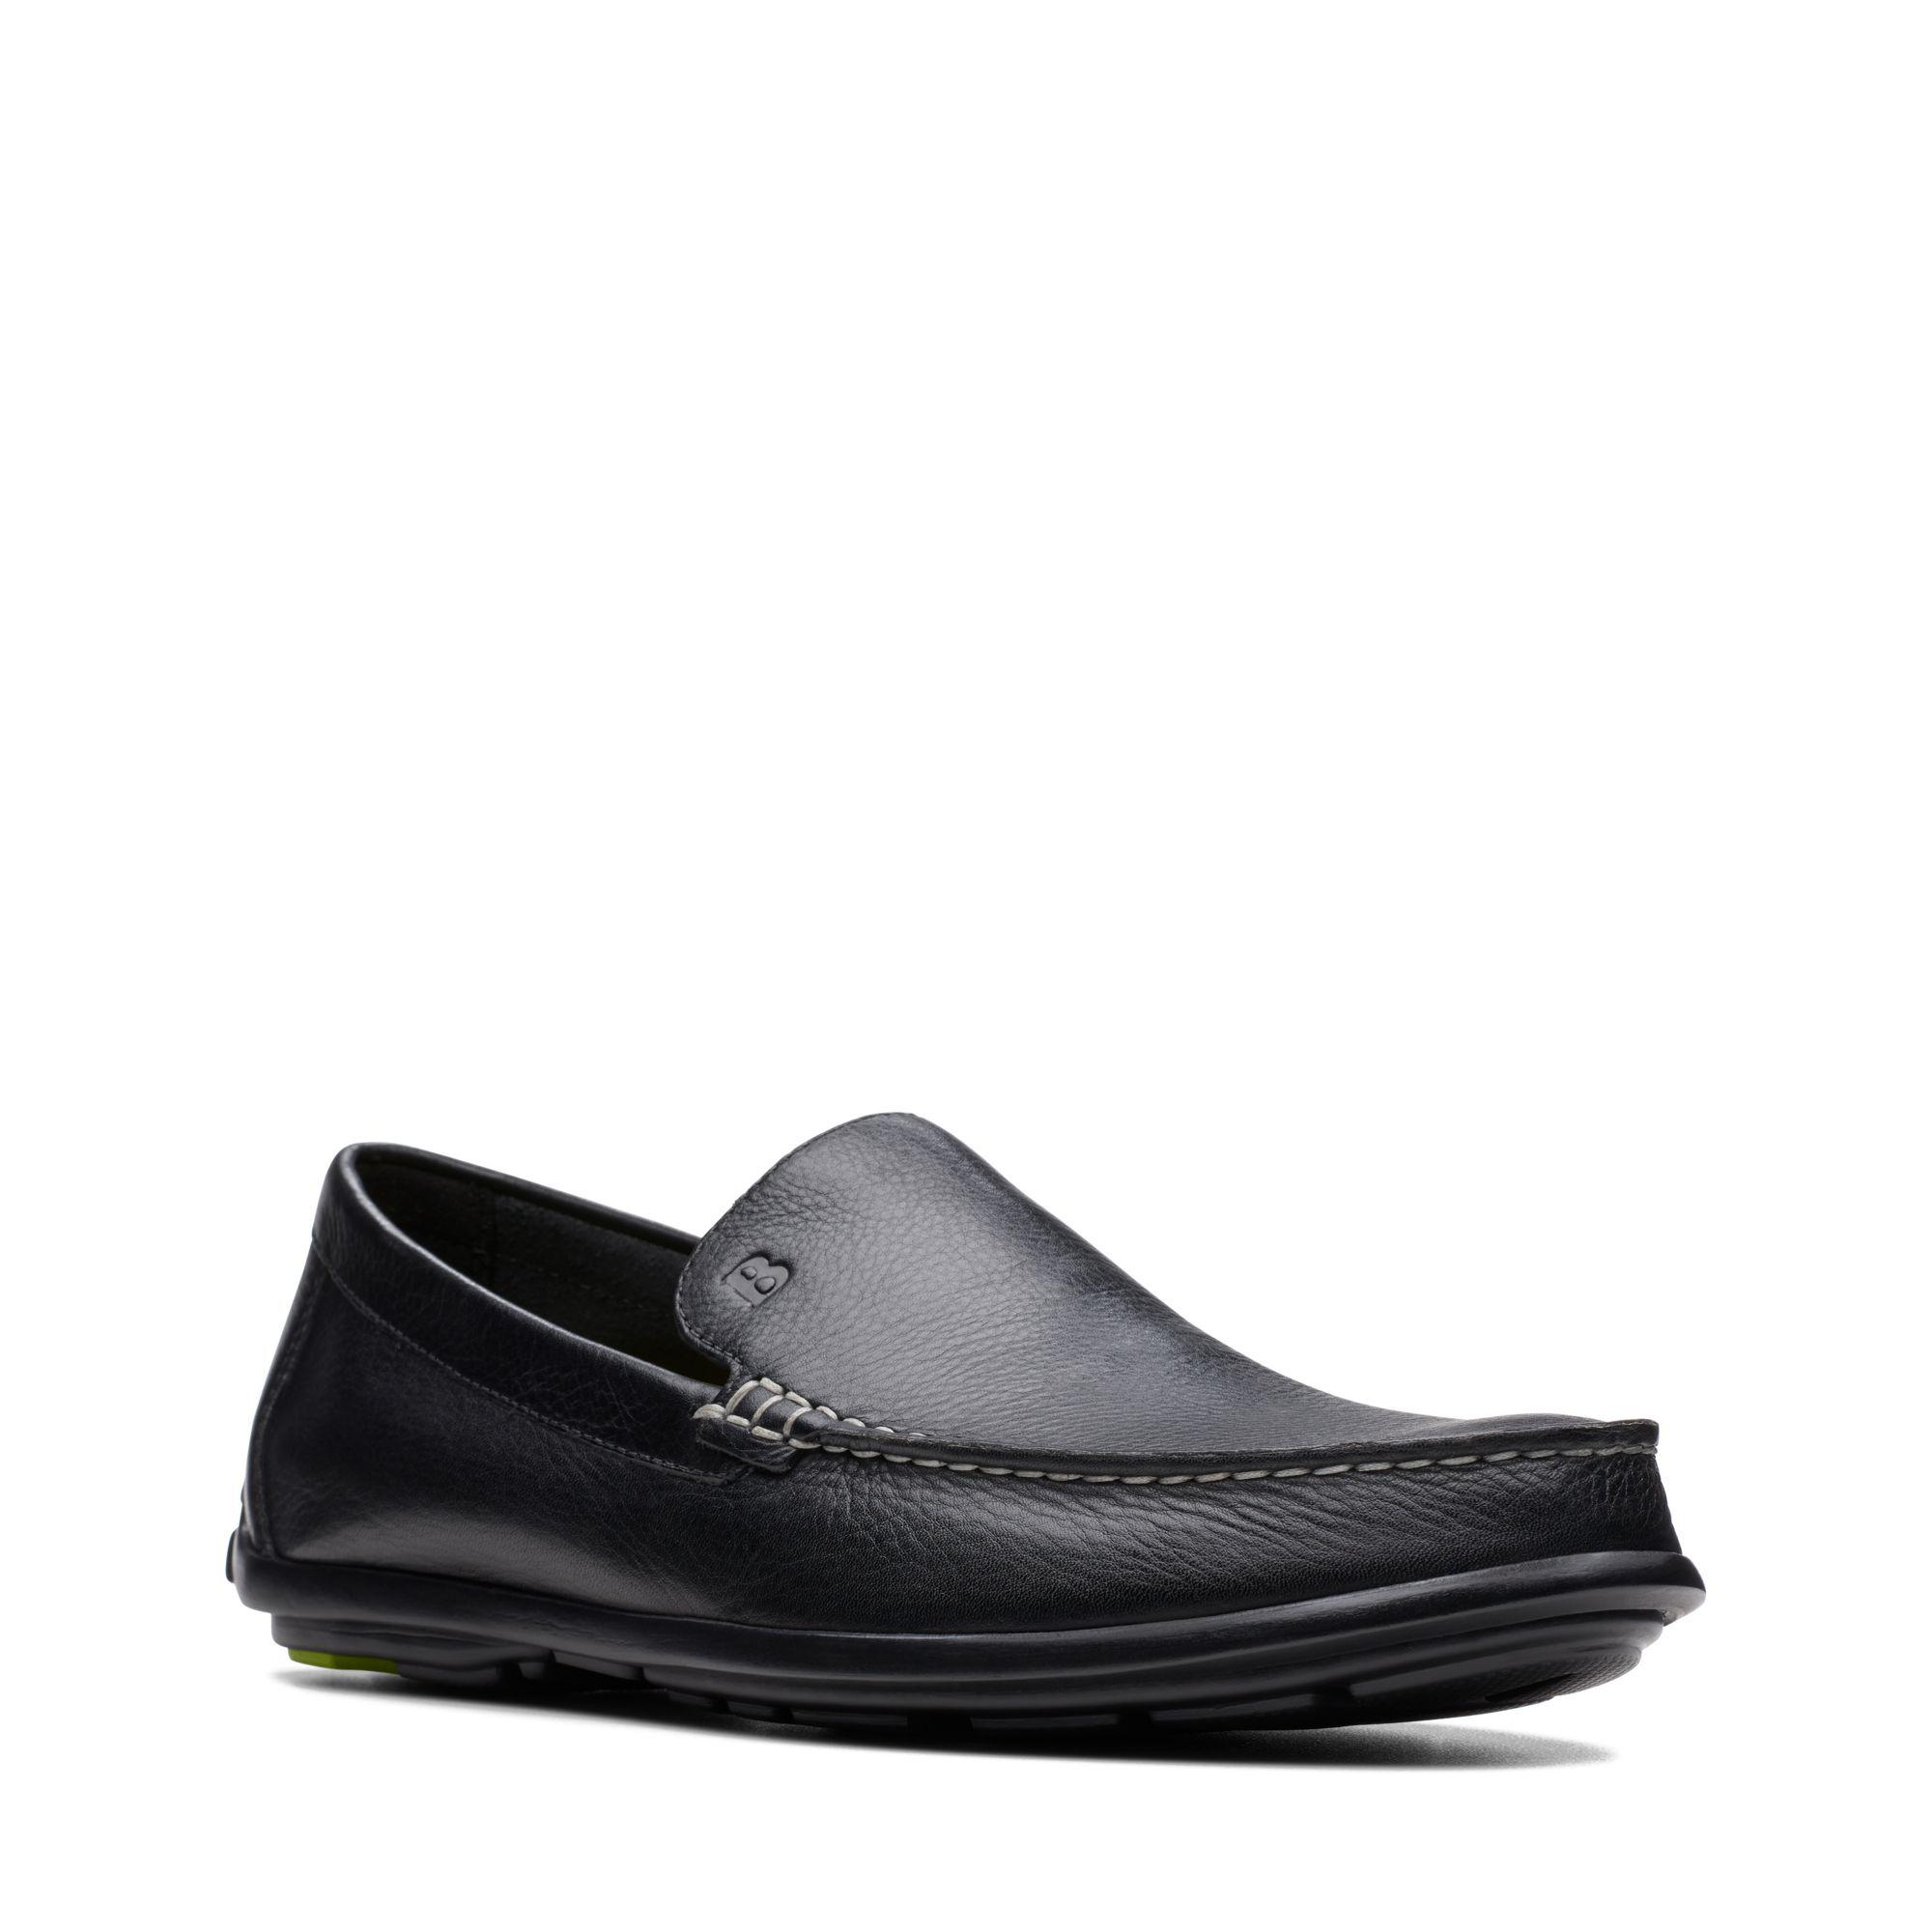 Clarks Leather Grafton Loafer in Black 